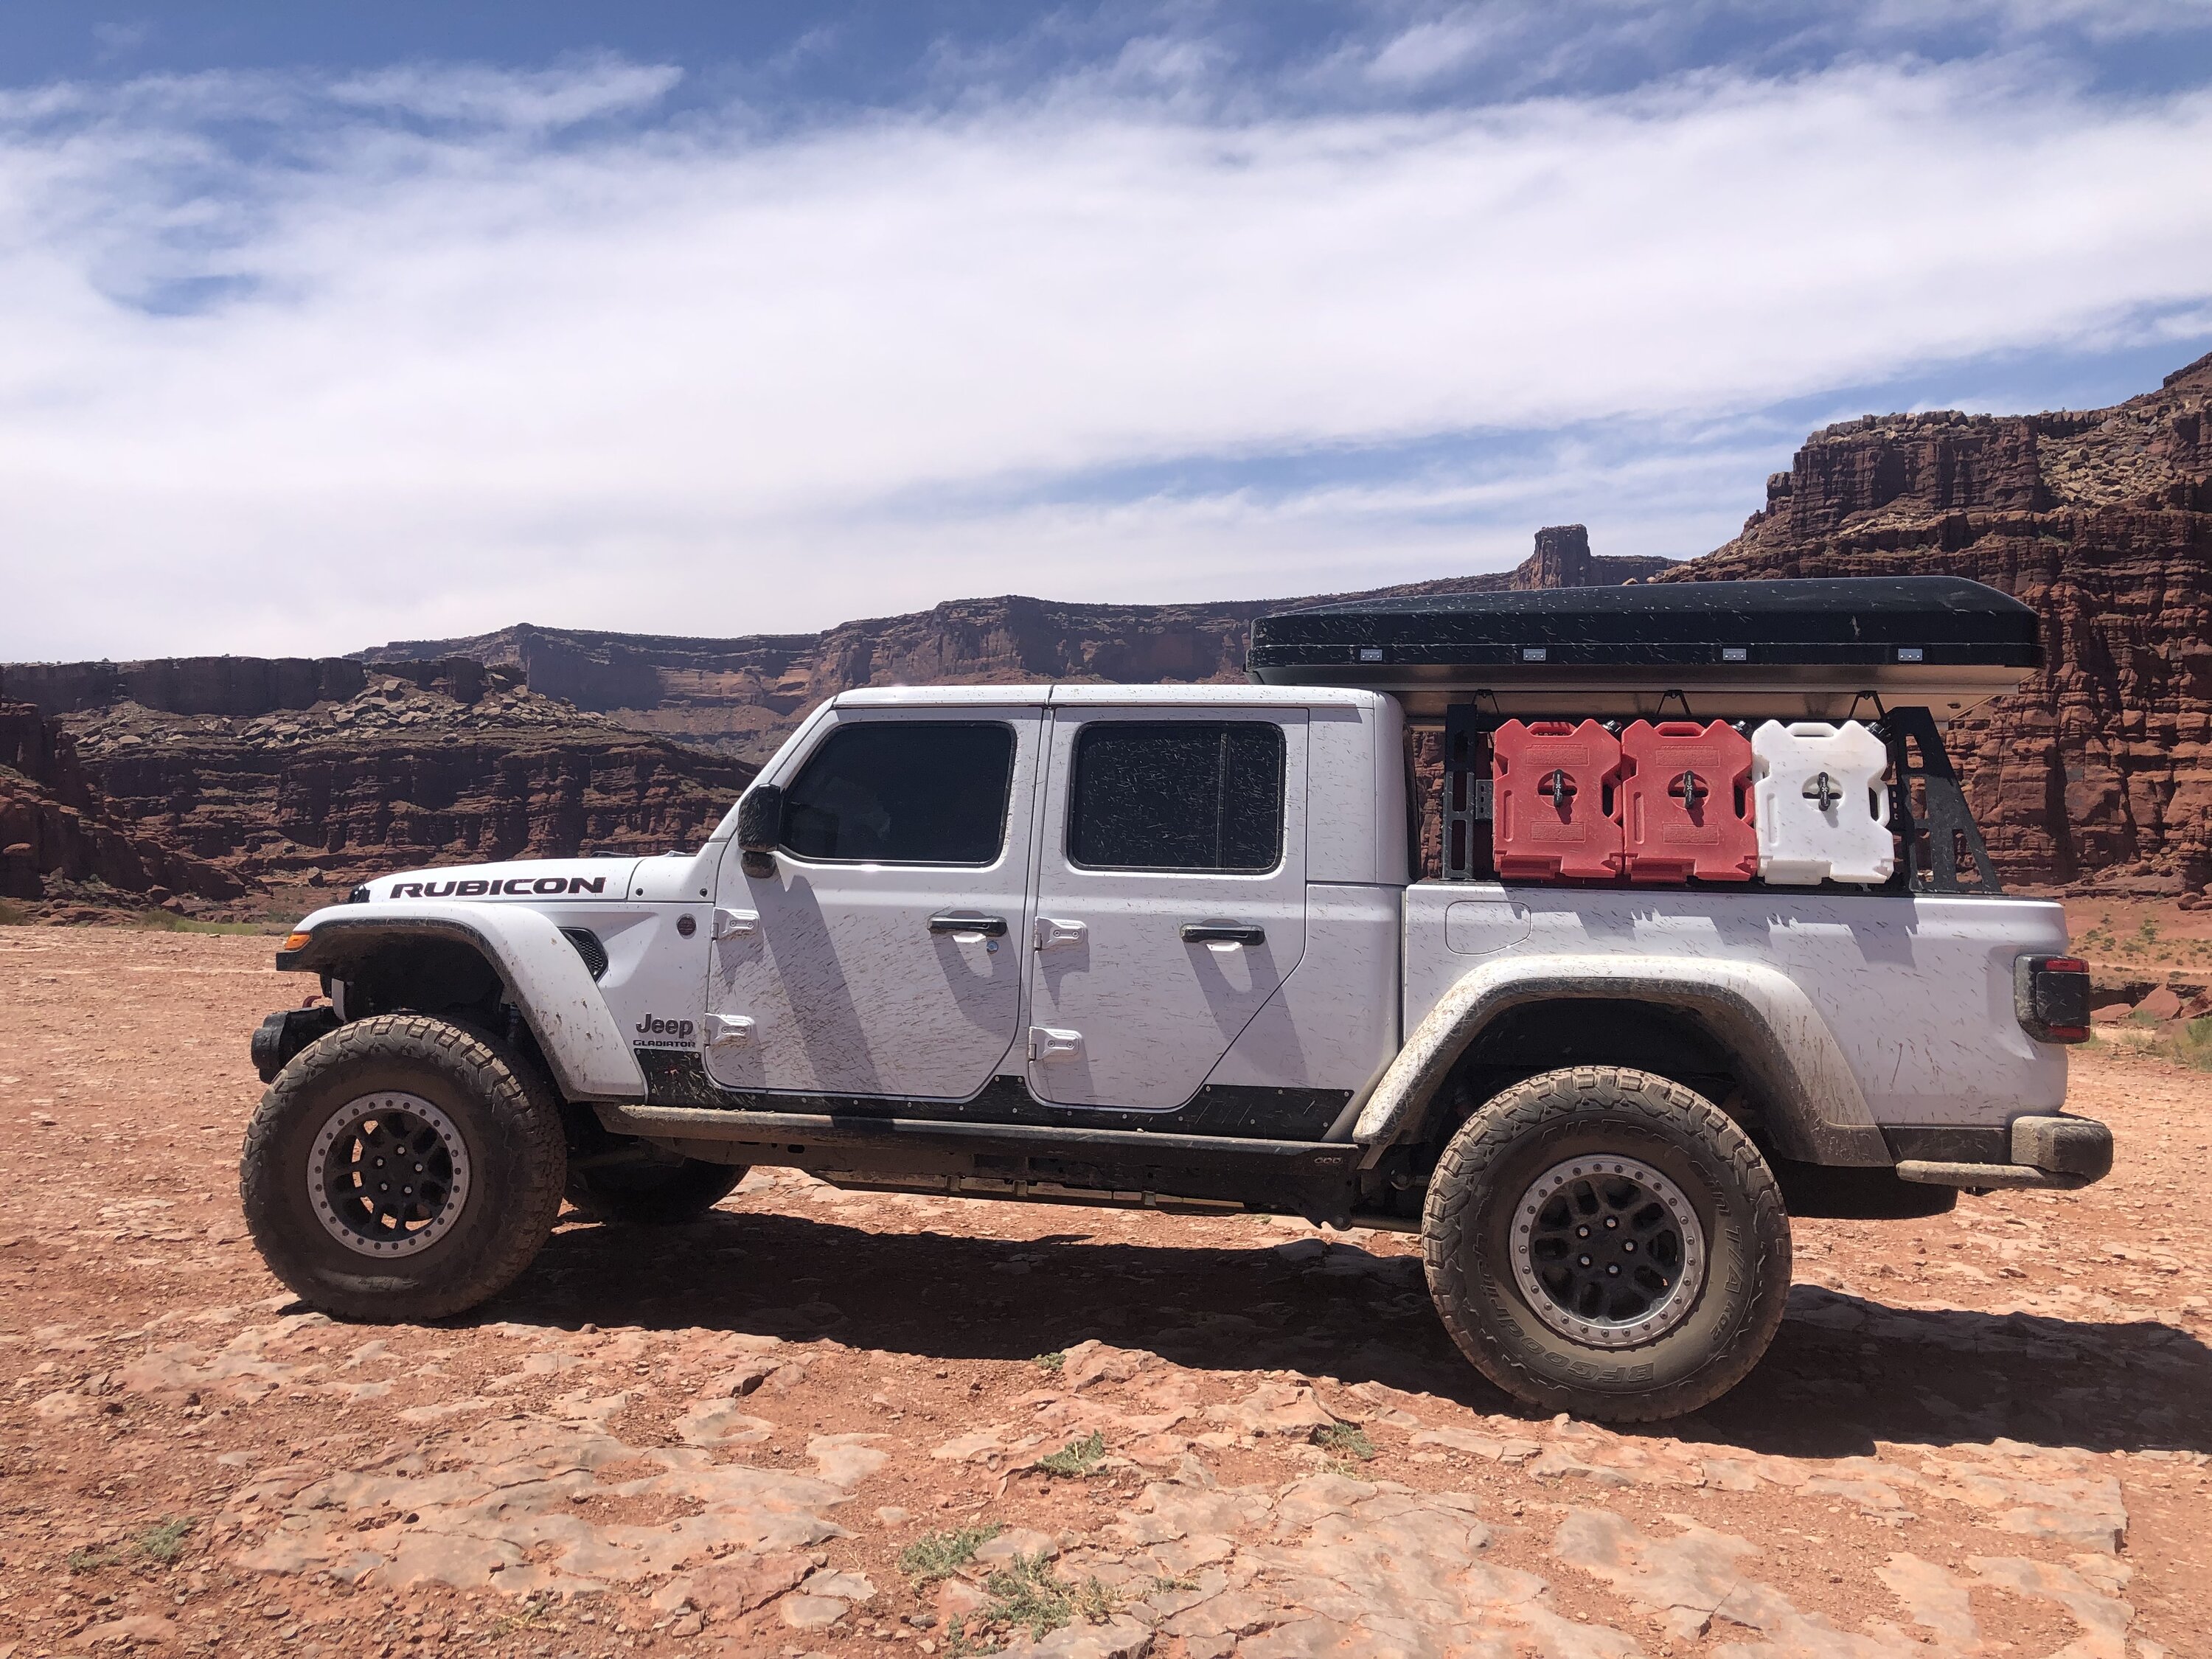 Jeep Gladiator From NW Louisiana to Silverton, CO to Moab and back in 10 days IMG_7246